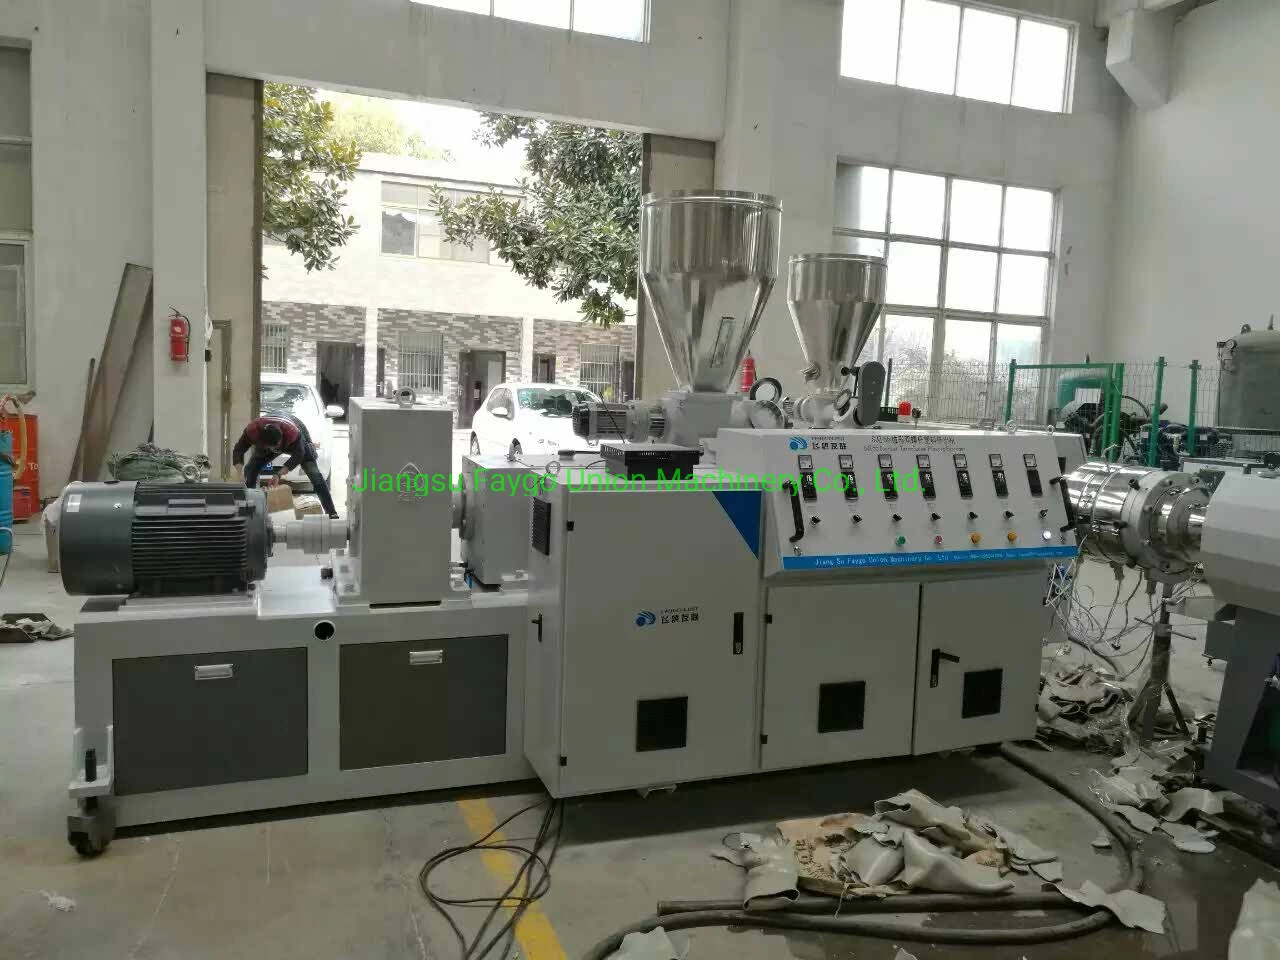 Plastic PVC CPVC Opvc PPR PE HDPE Water Gas Pipe Extruder Machine Agricultural Drip Irrigation Pipes Garden Fiber Reinforced Soft Hose Extrusion Production Line